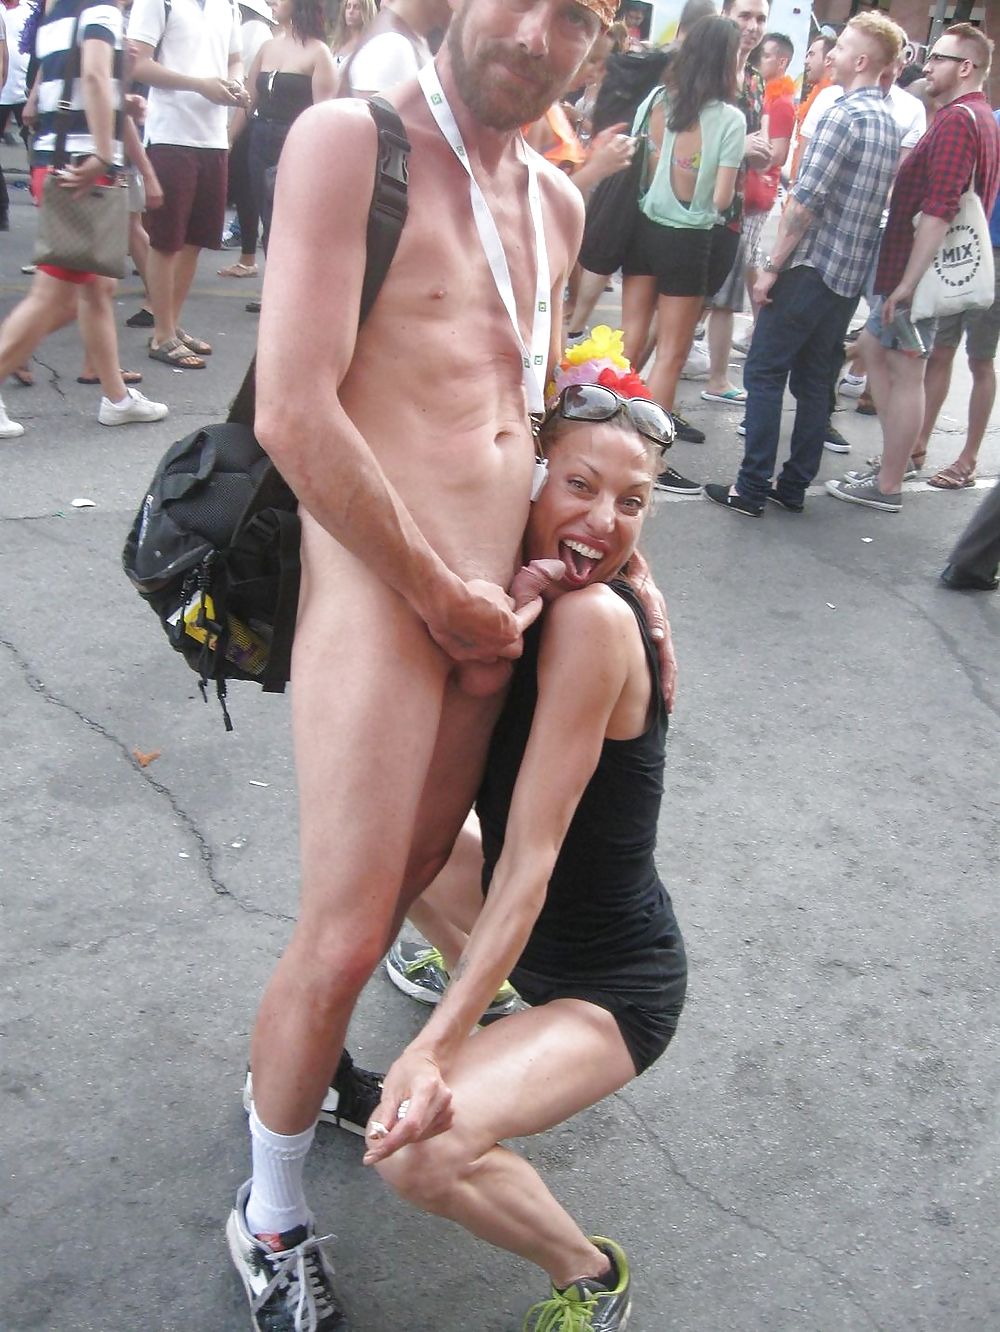 Forced Public Nudity Humiliation